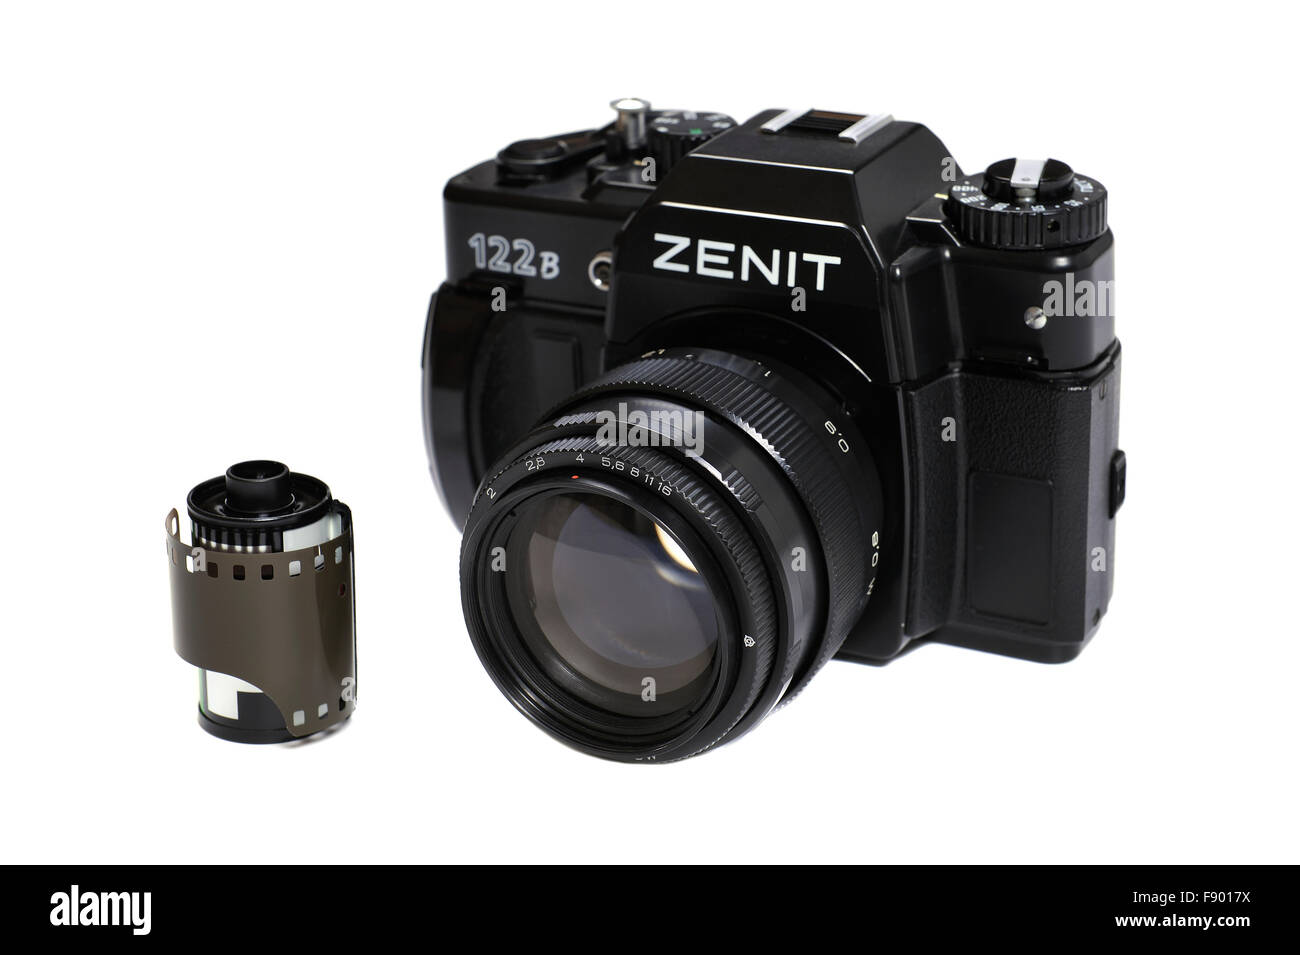 Zenit-122B is a Russian SLR camera with lens JUPITER 9 MS for use with 35 mm film Stock Photo